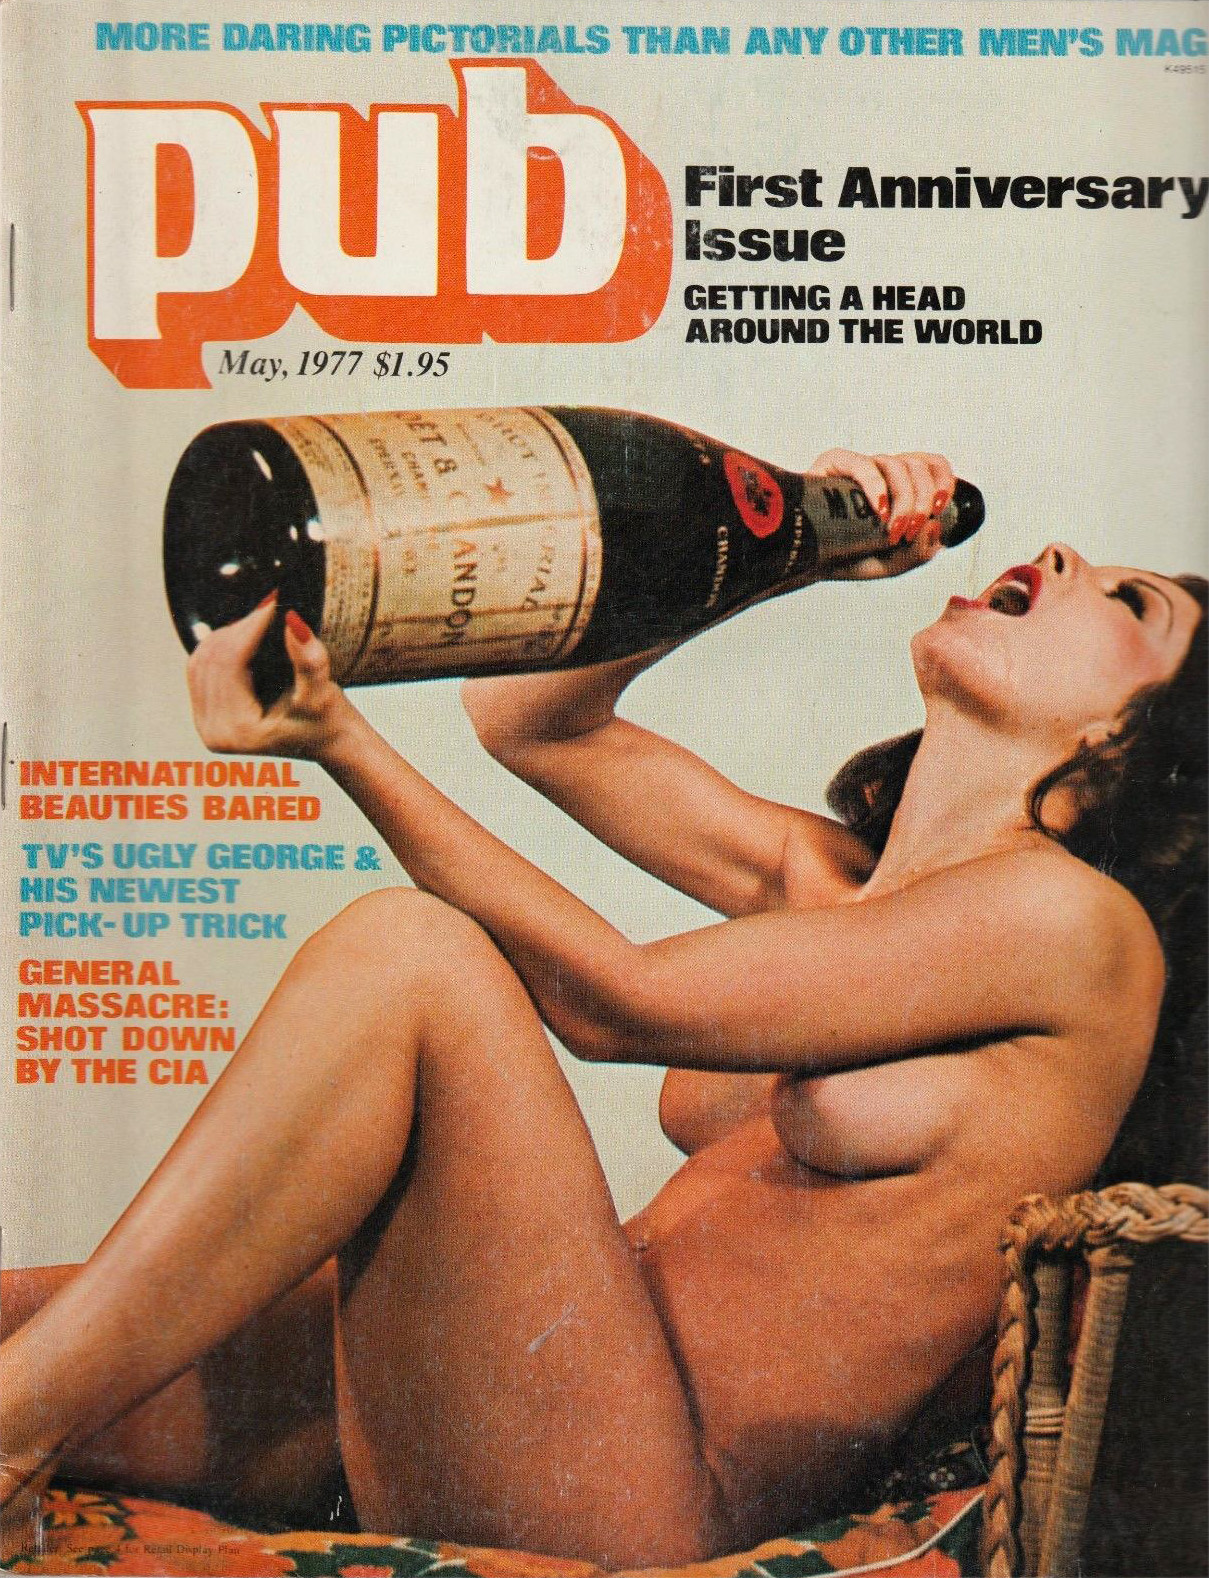 Now, let's direct our focus to another medium - magazine covers, s...